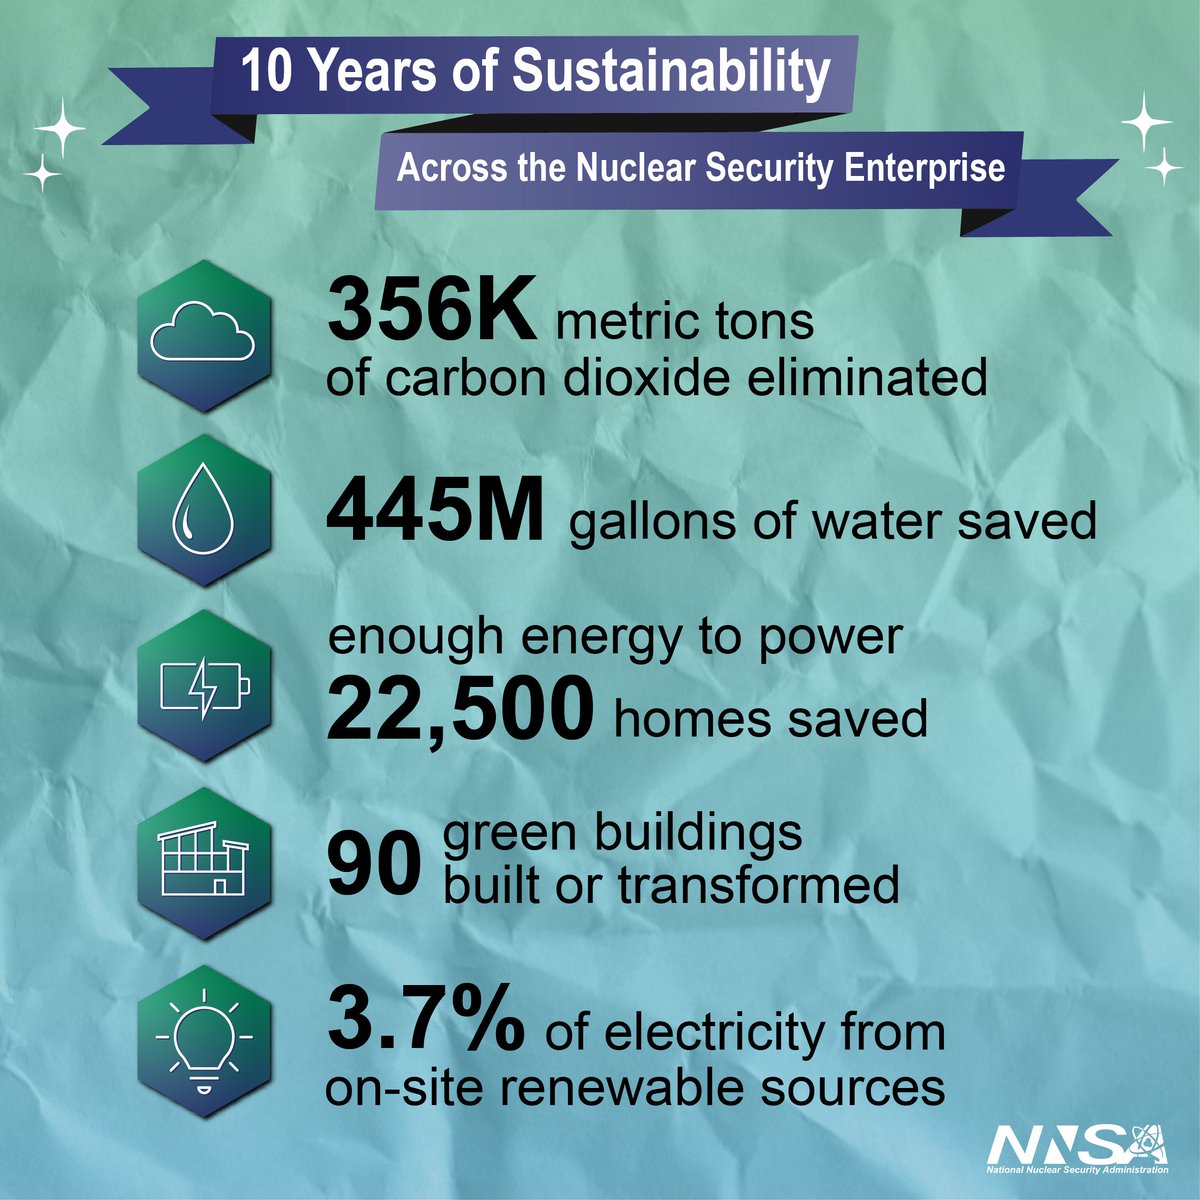 With #EarthDay only 4 days away, let’s take a look at achievements across the Nuclear Security Enterprise in sustainability over the past 10 years. Keep an eye on our feed next week as we go more in-depth on how #NNSA protects our planet today.